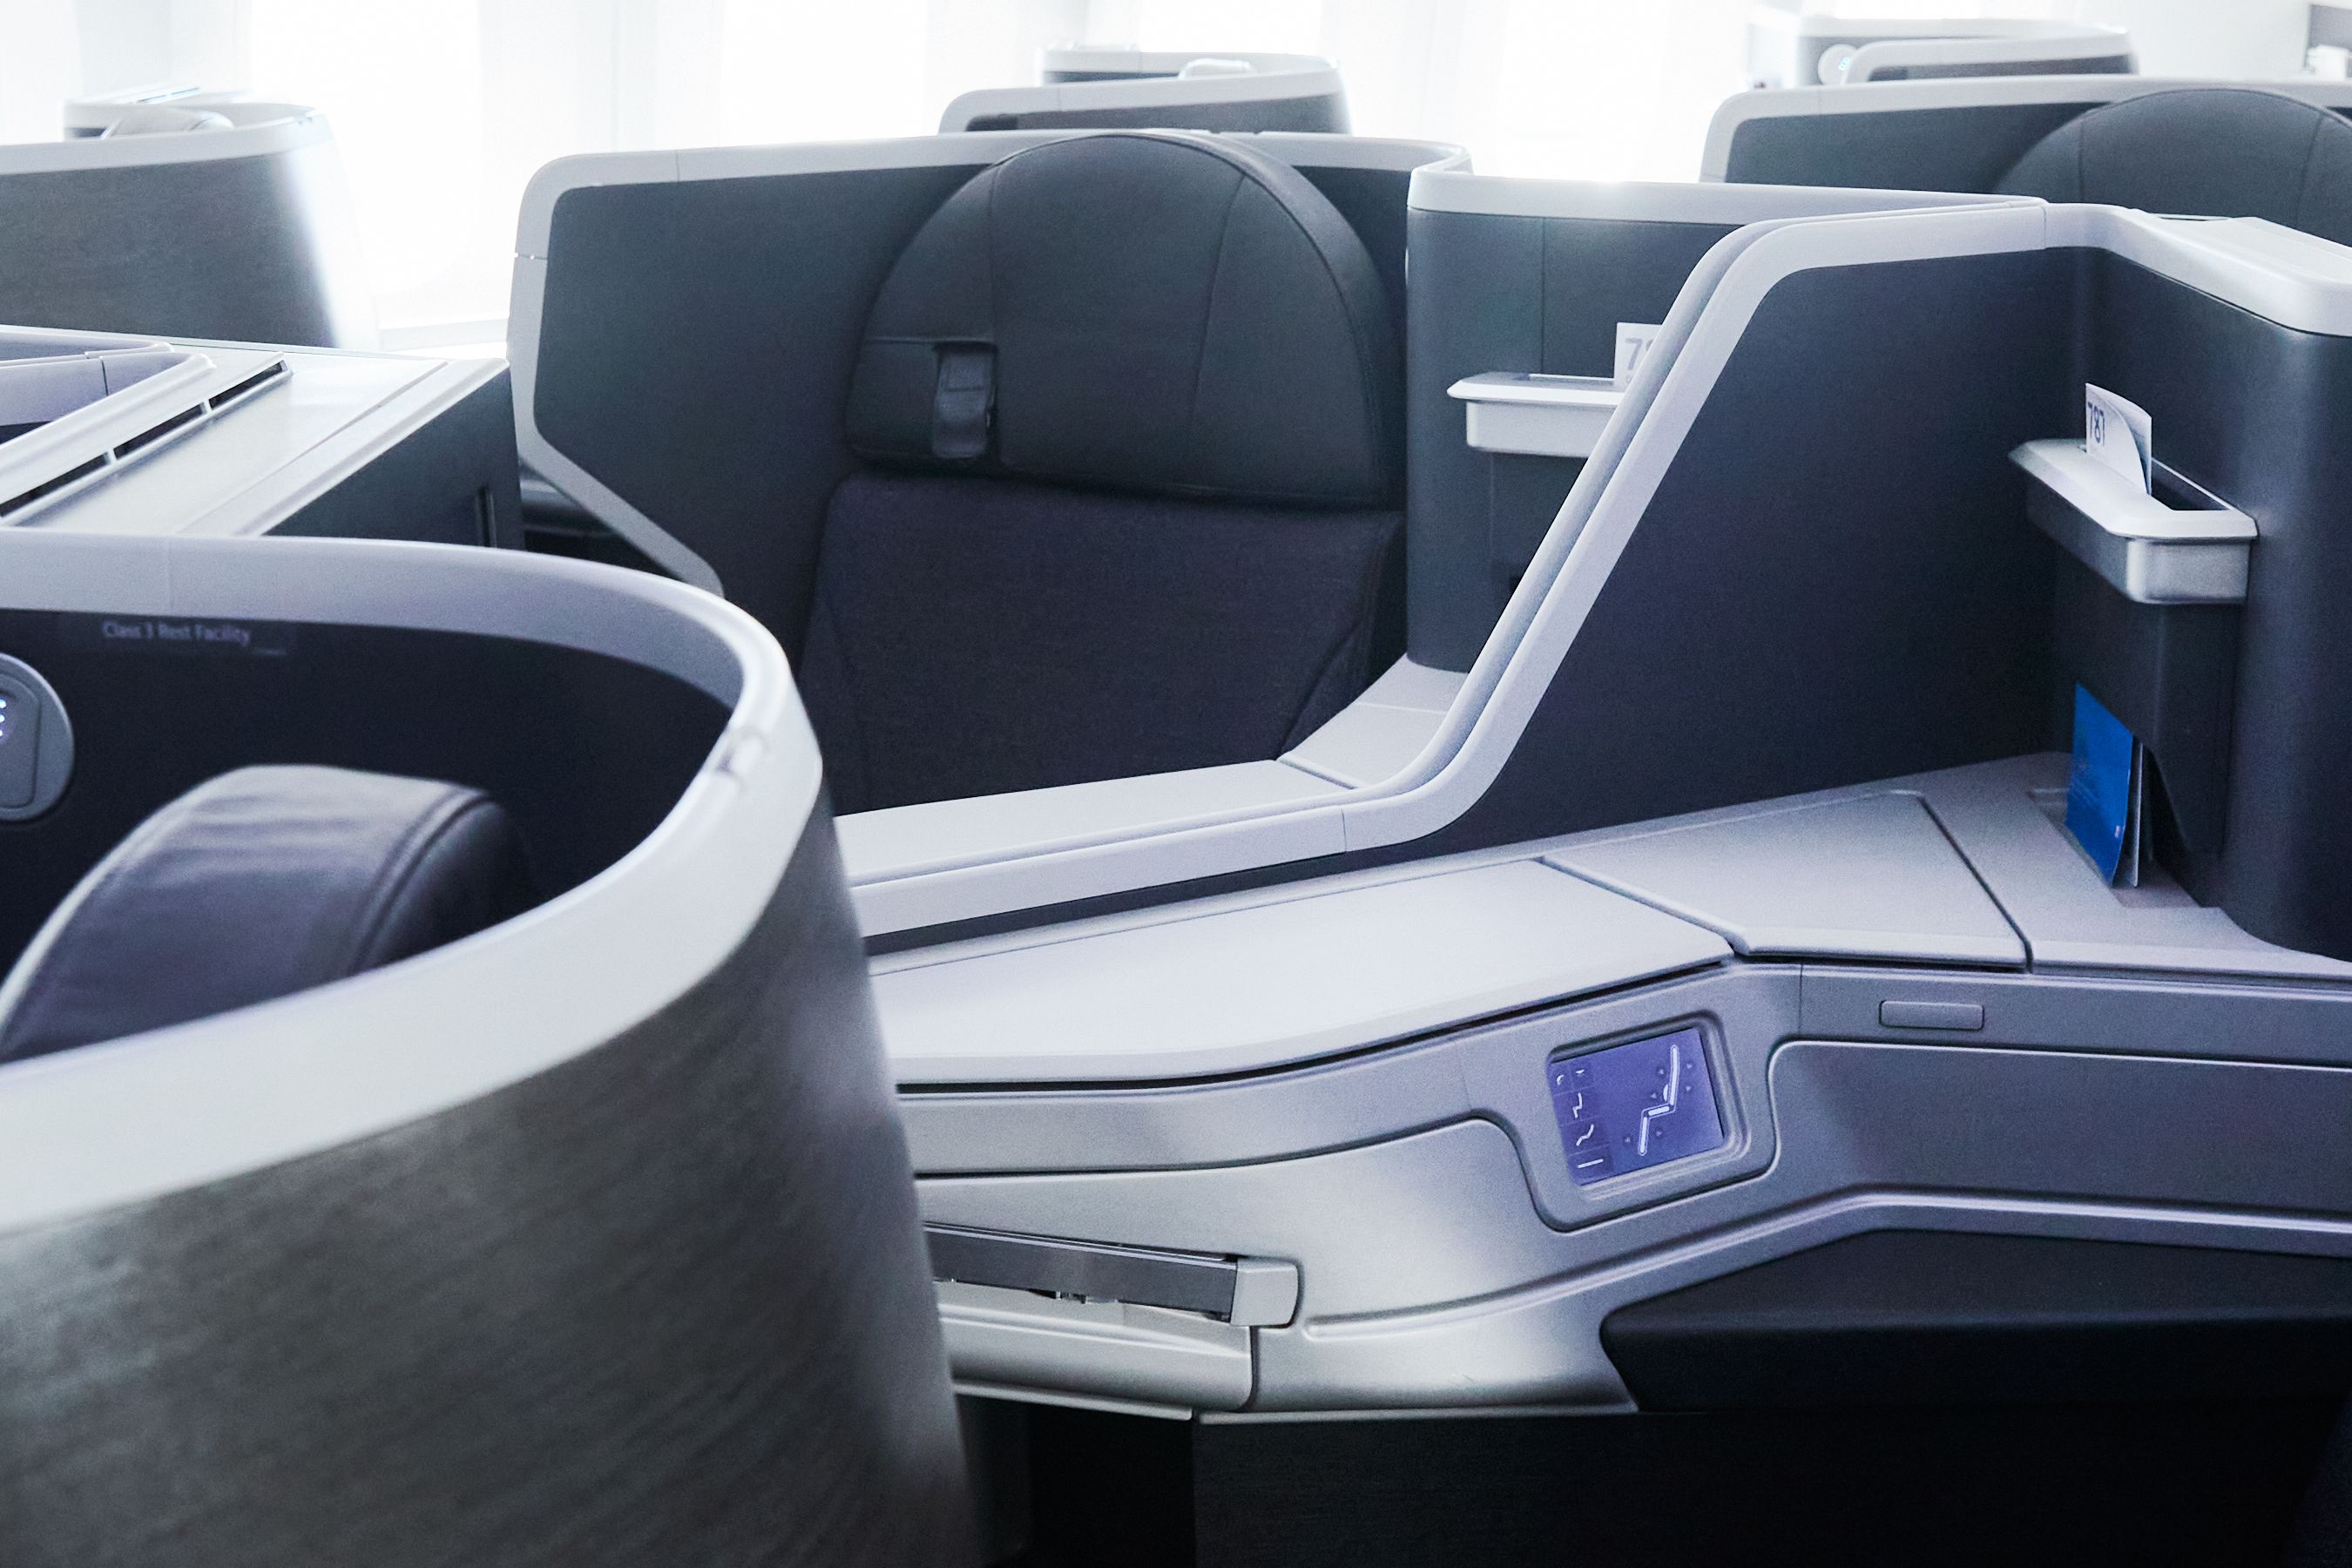 A few American Airlines Flagship Business Class Seats.